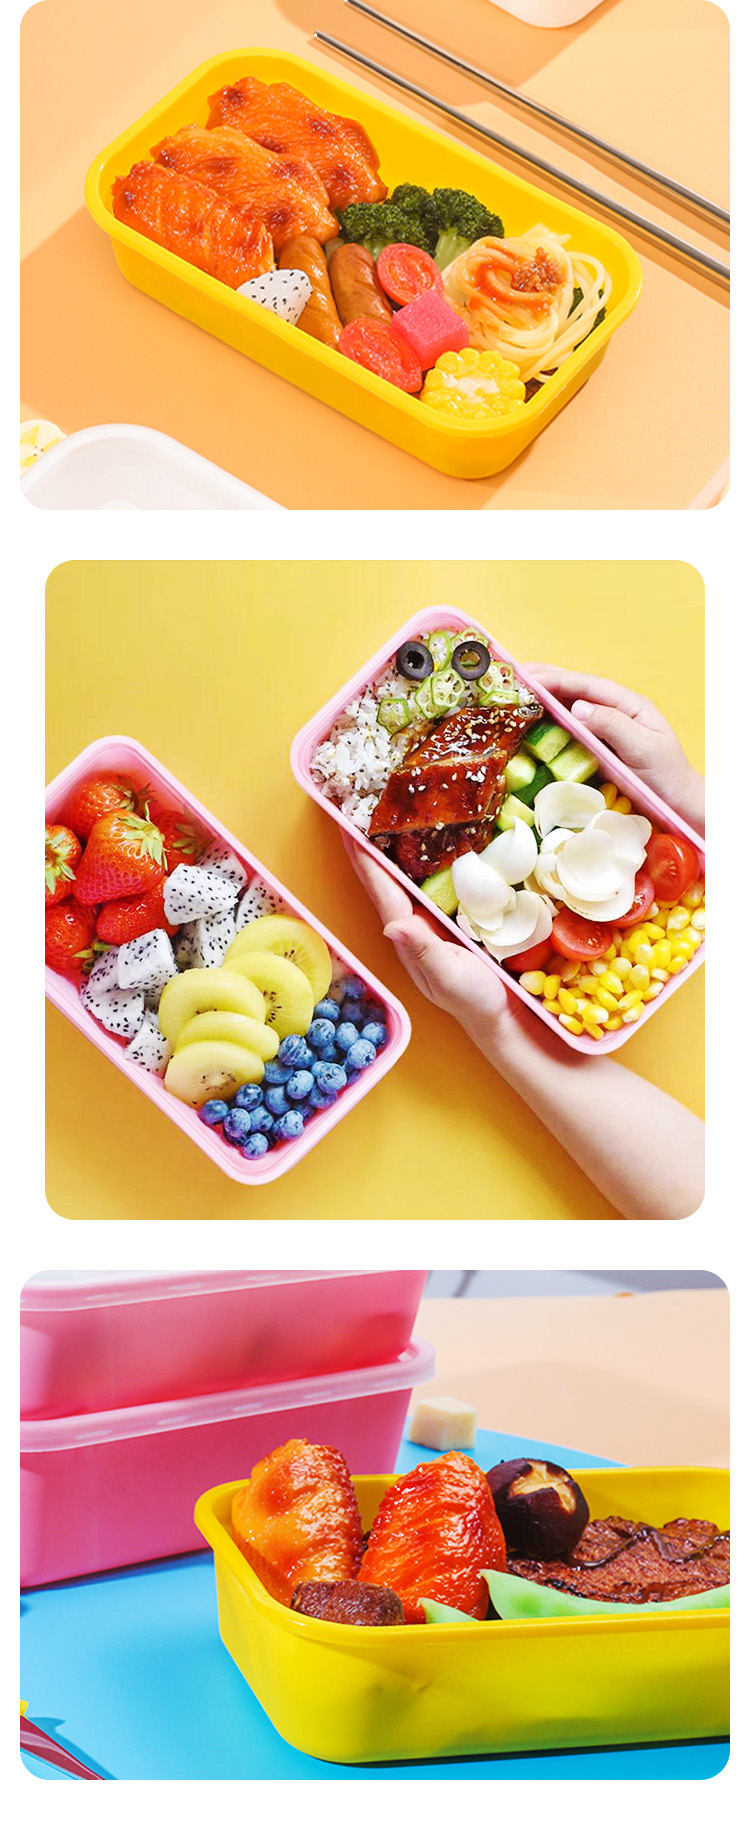 Takeout Plastic Food Containers